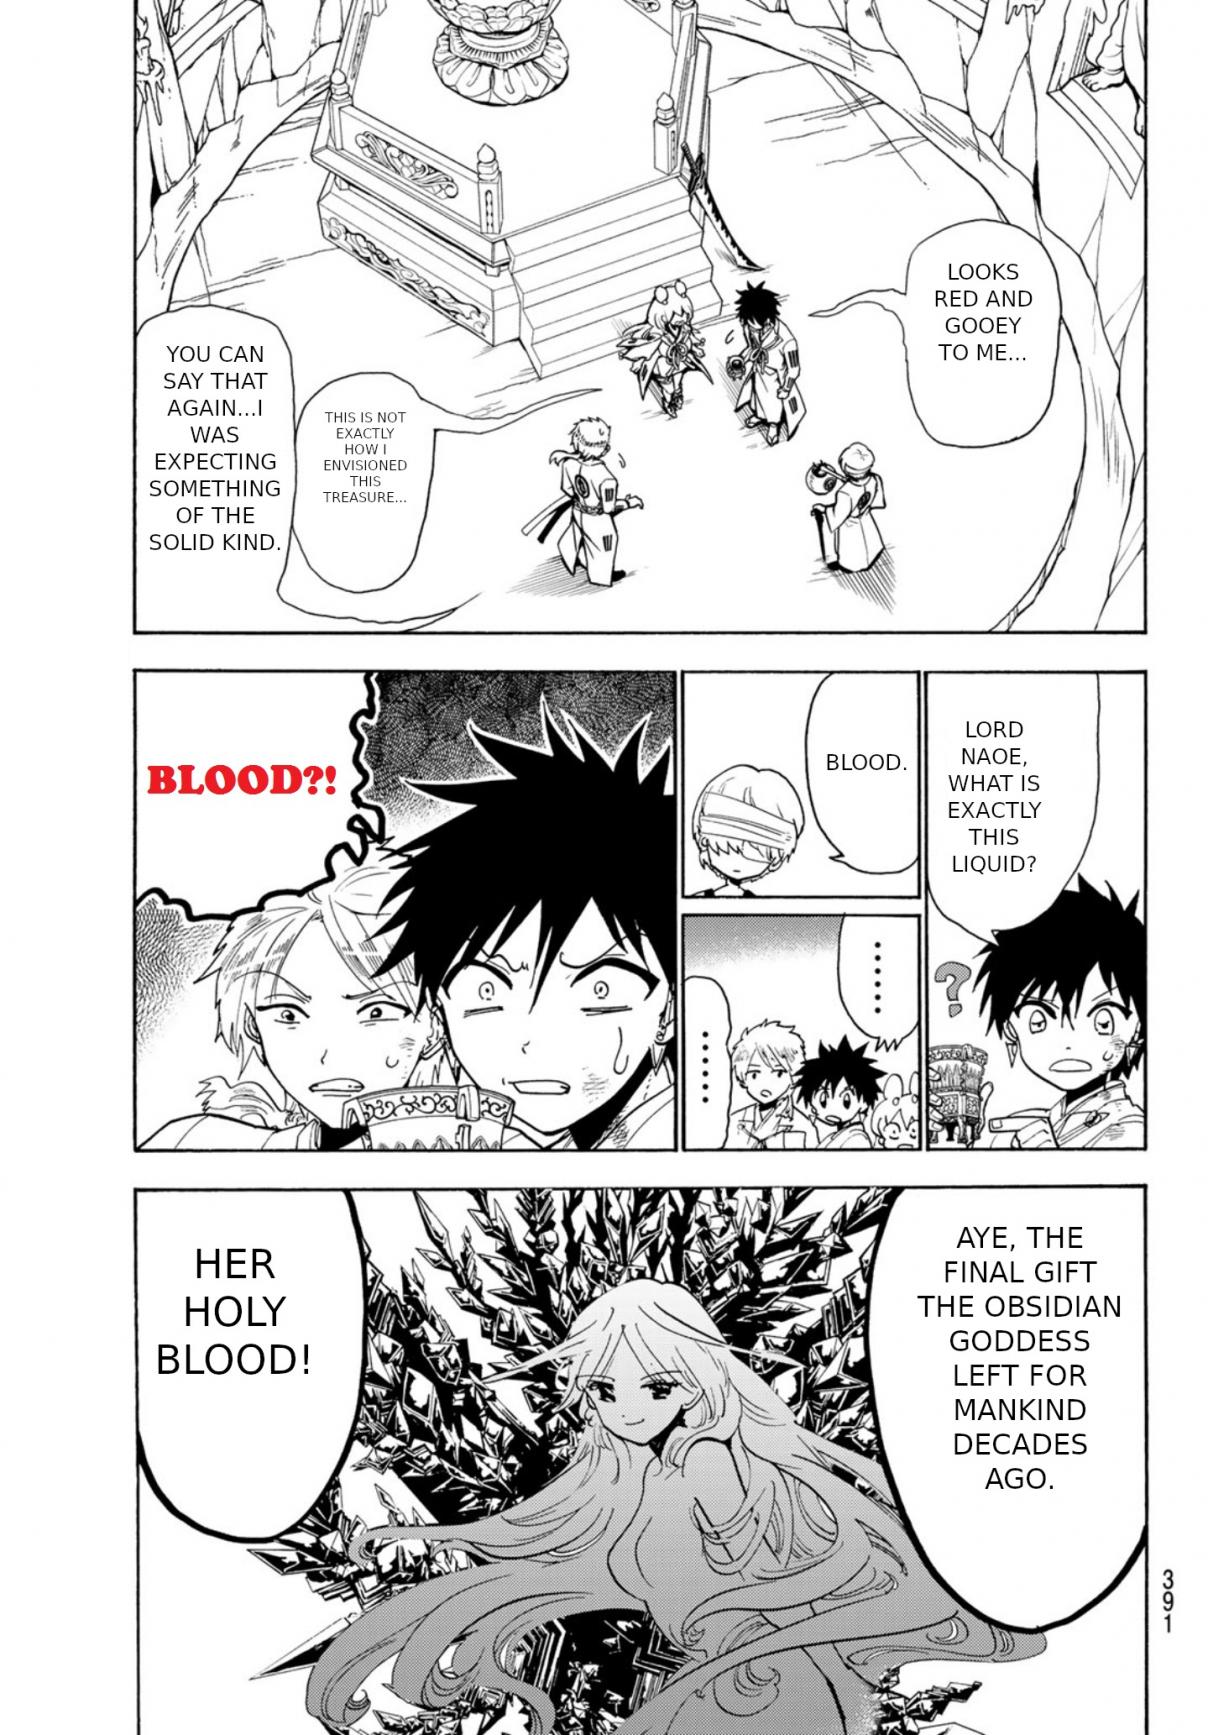 Orient Vol. 9 Ch. 76 The Blood of Hope